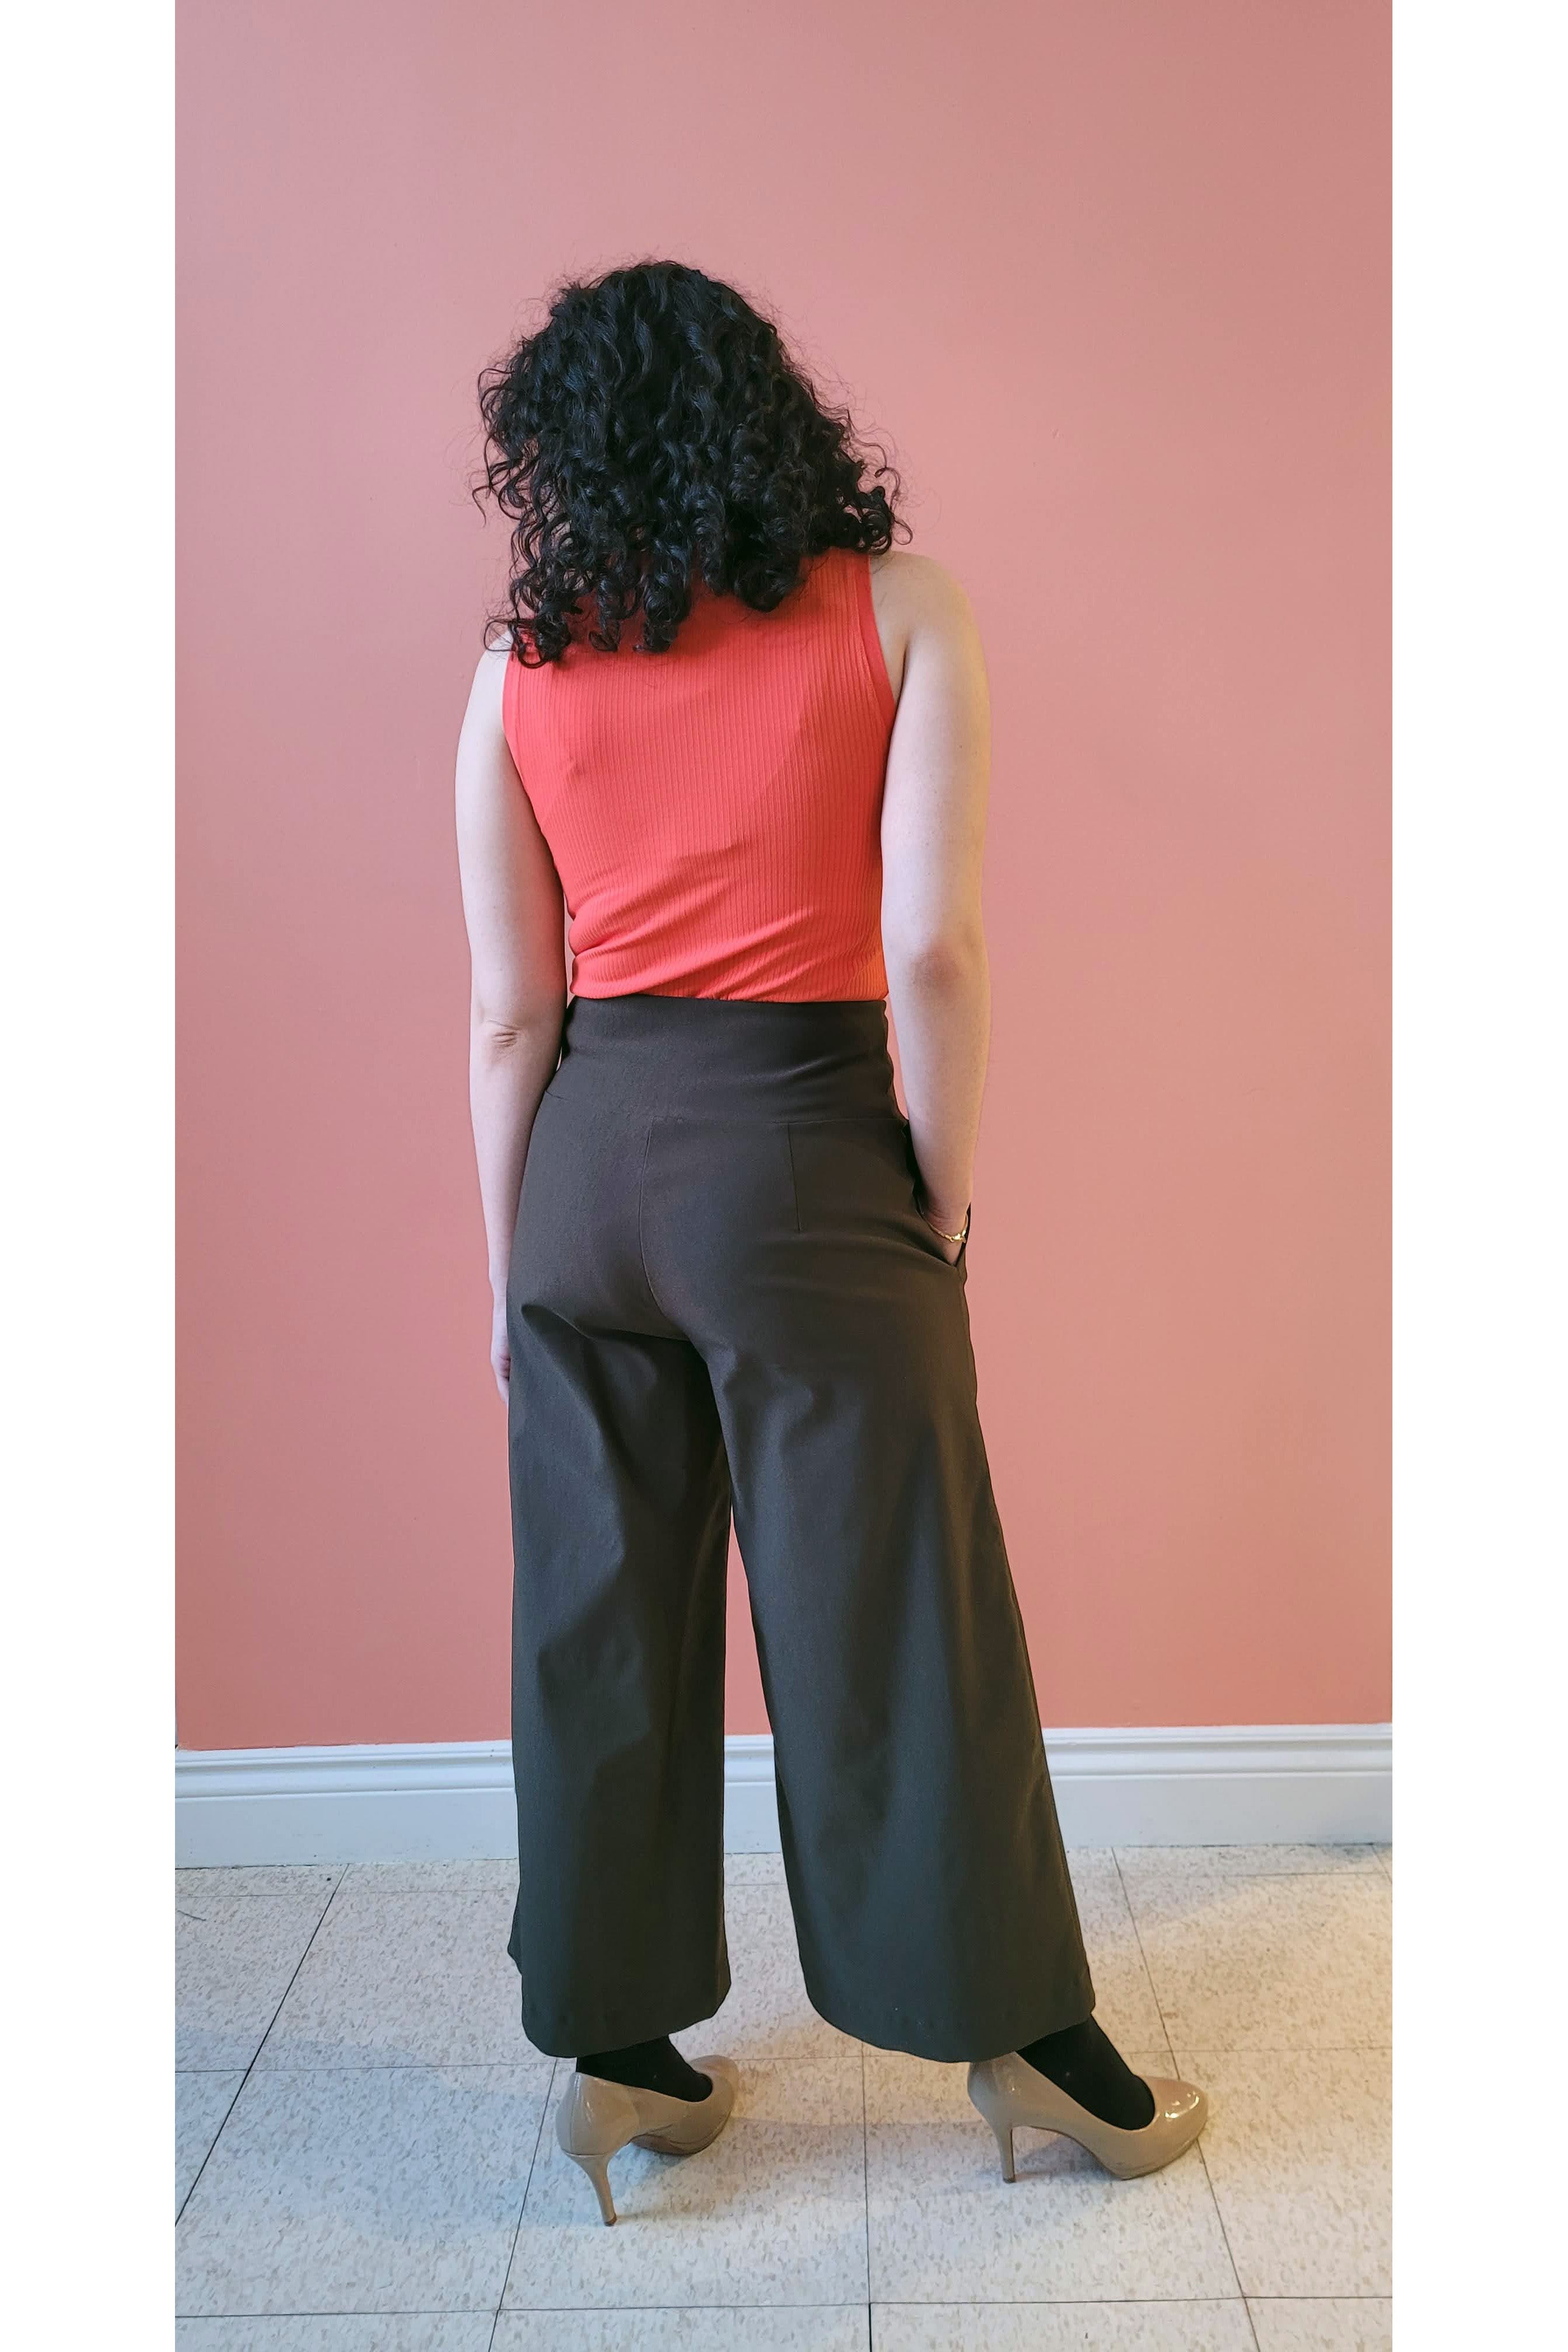 Ima Top by Melow, back view, Coral, sleeveless, fitted, rib knit, slightly cropped length, bamboo rayon, eco fabric, OEKO-TEX certified, sizes XS to XXL, made in Montreal